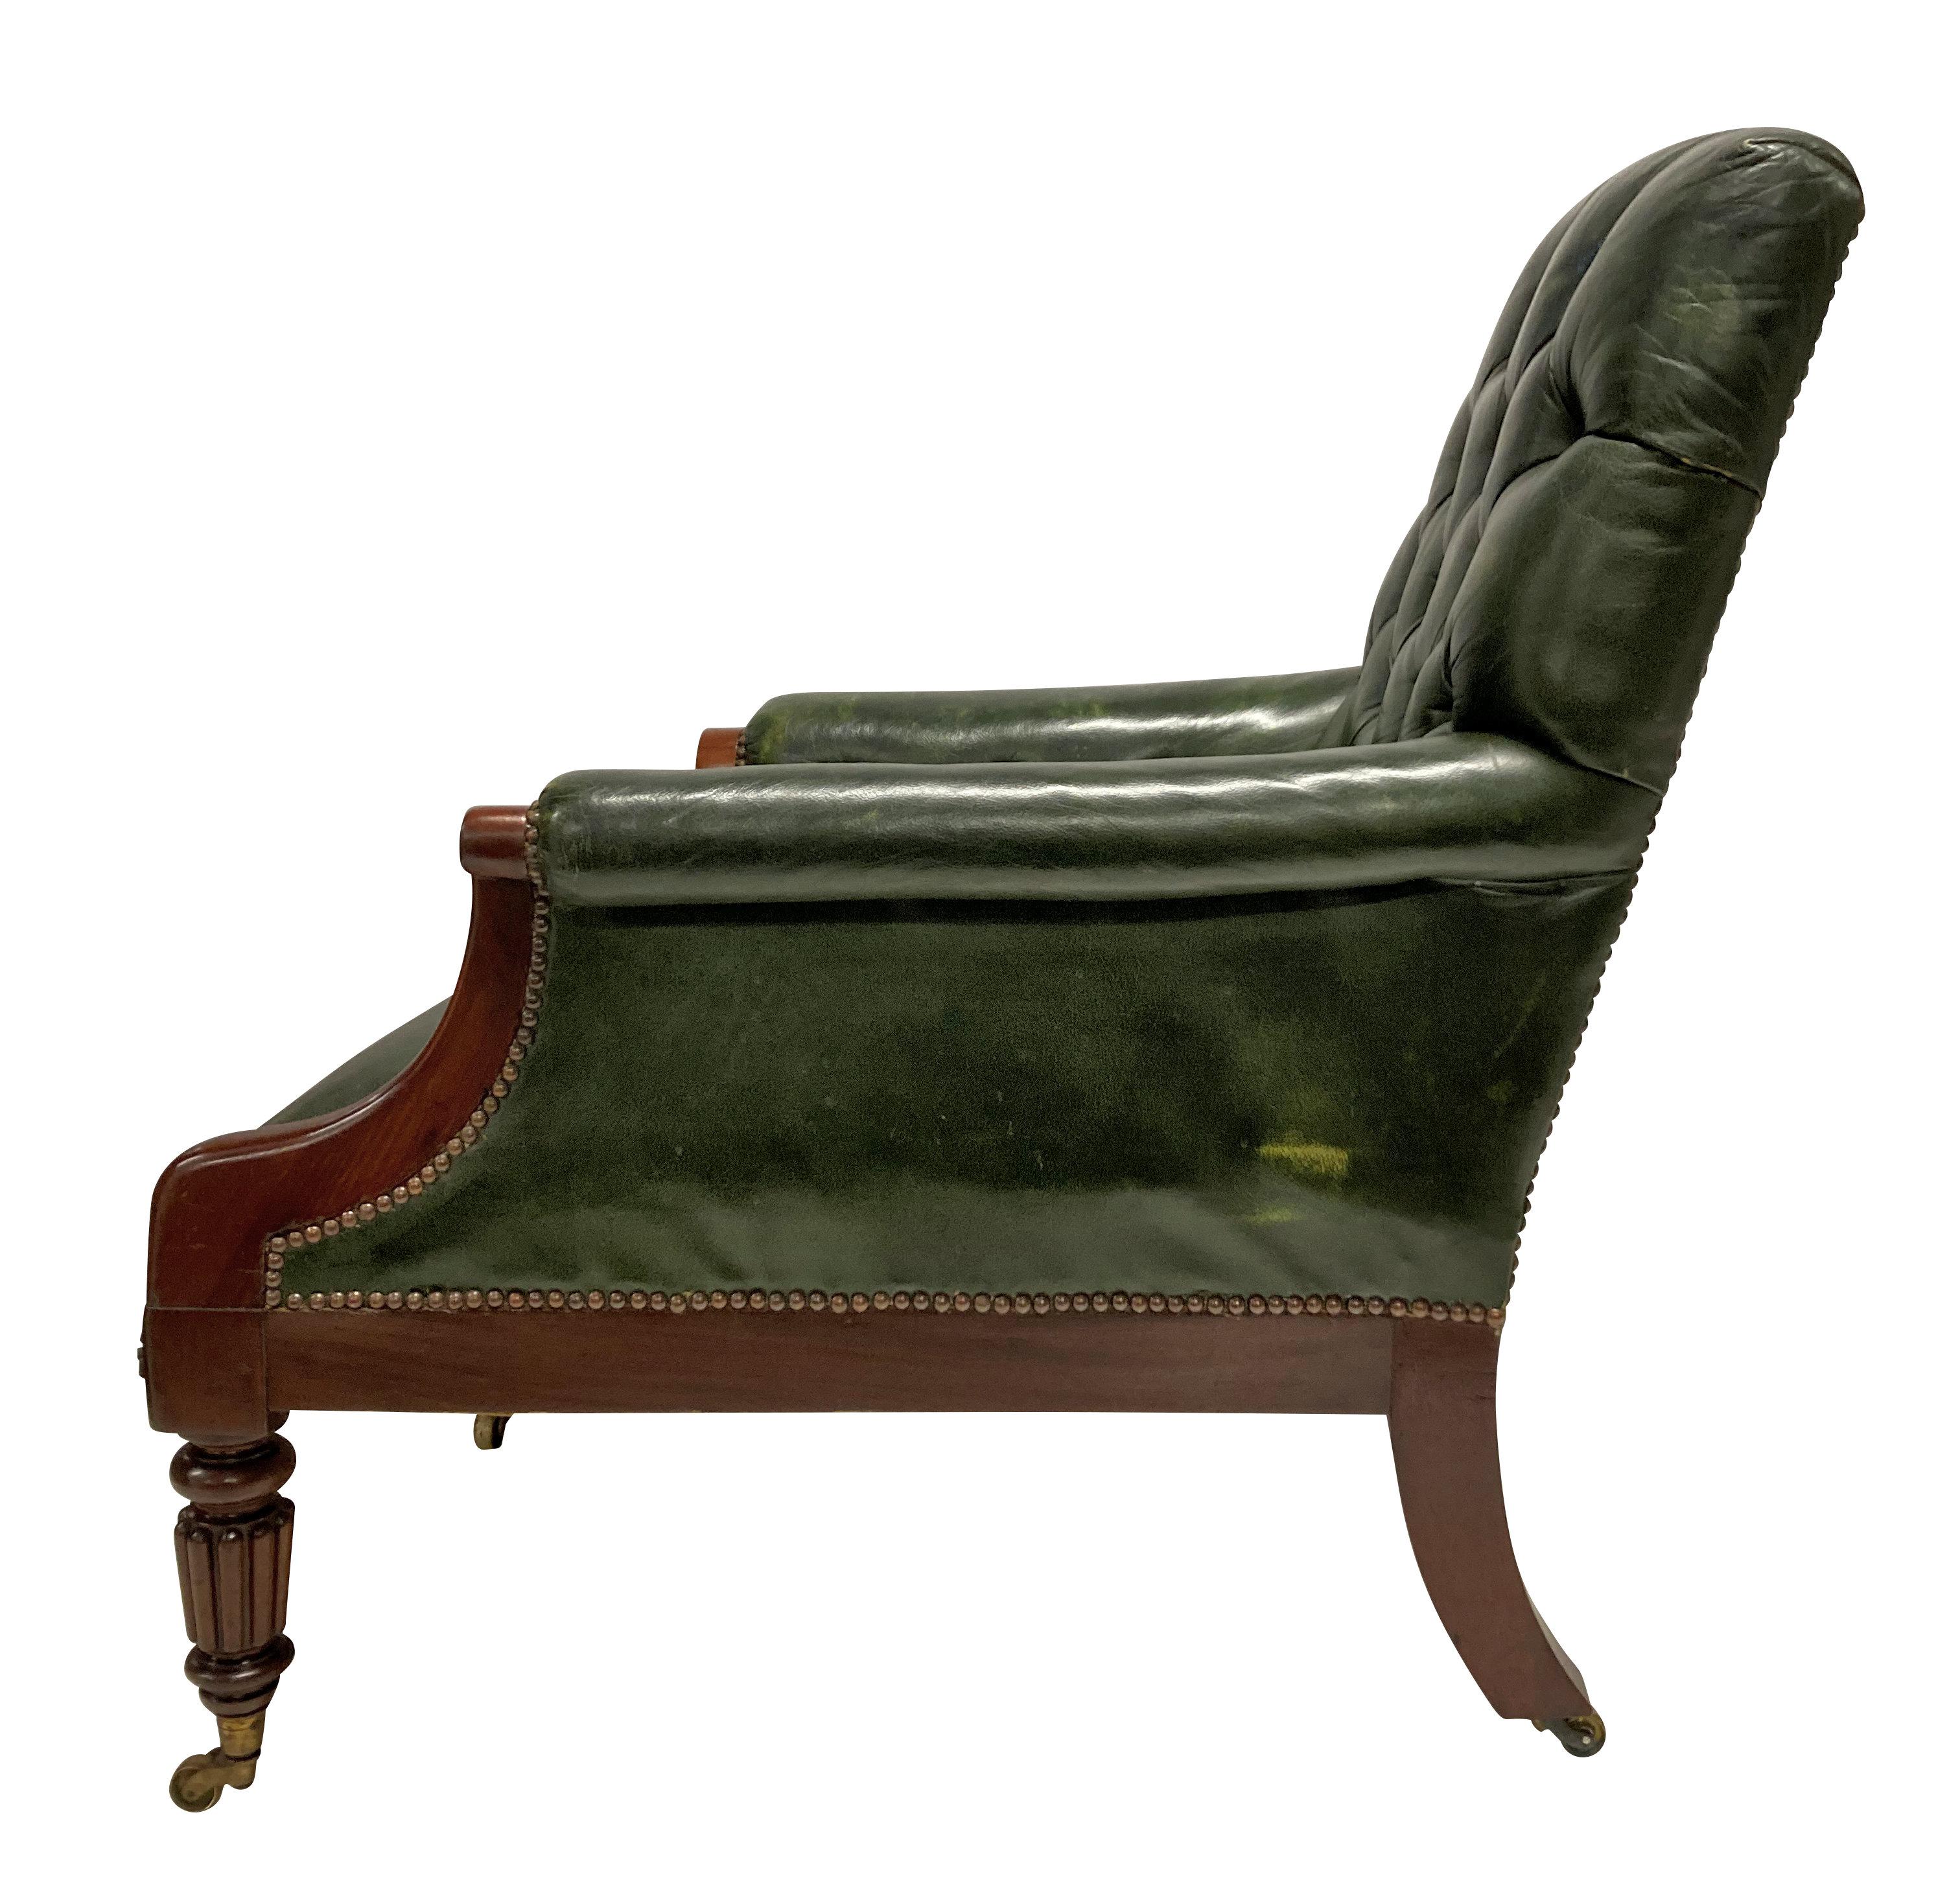 English William IV Mahogany & Leather Library Chair For Sale